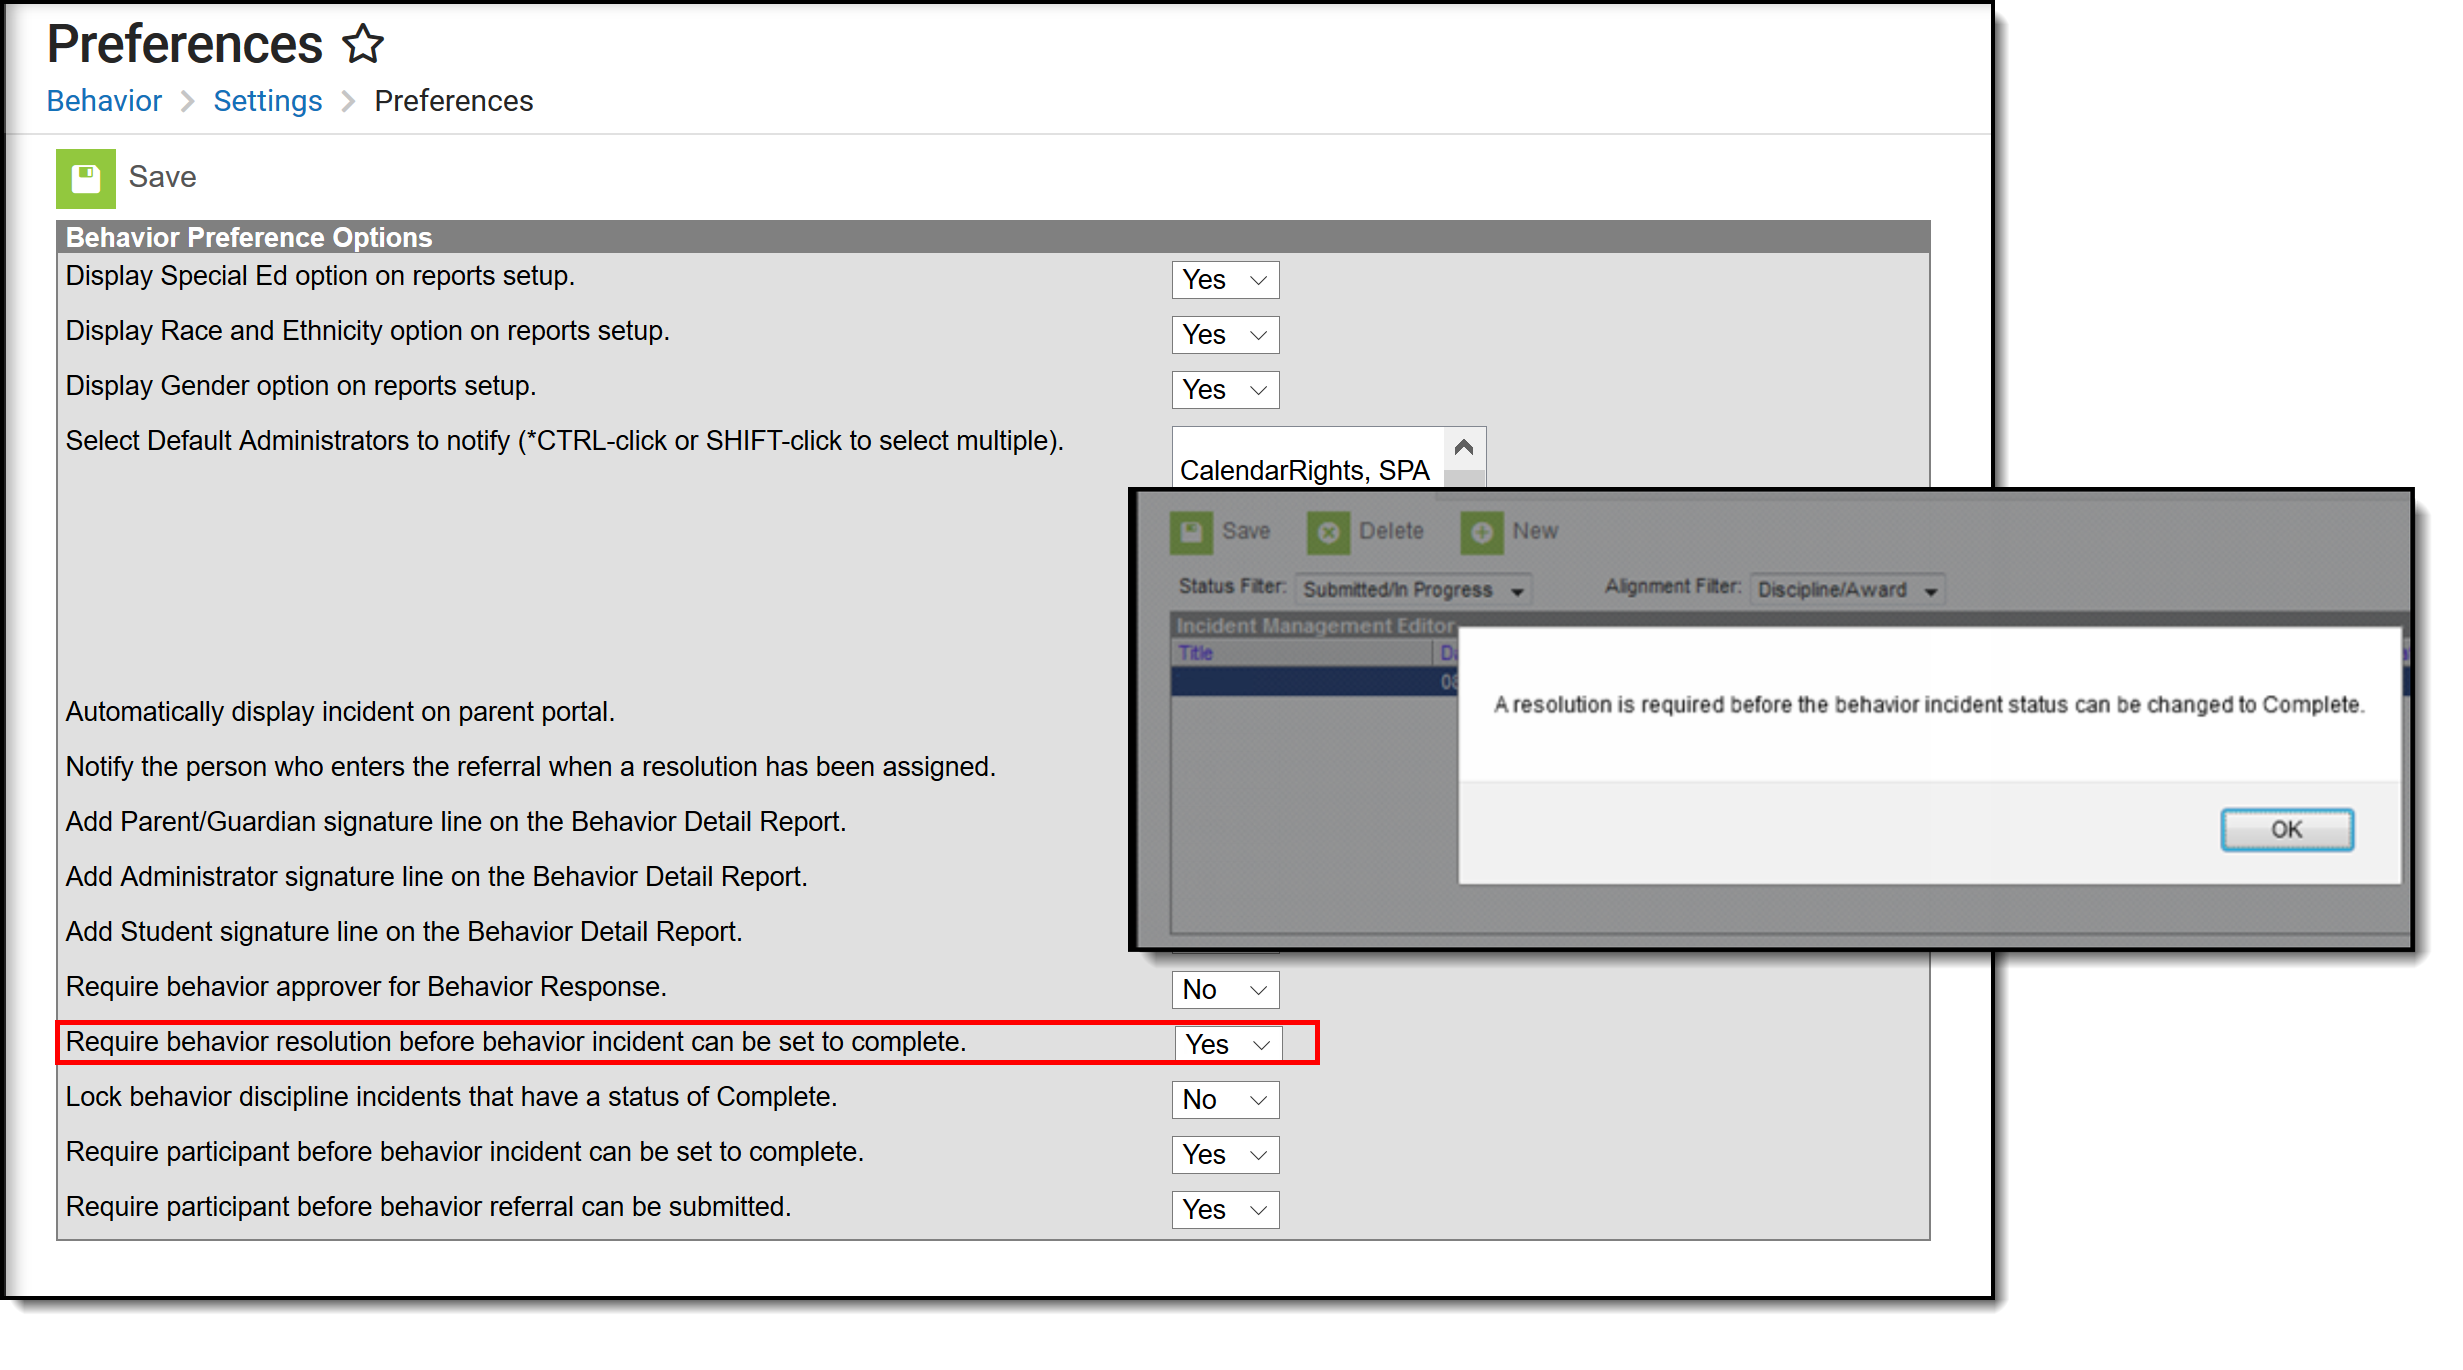 Screenshot of Behavior system preferences to save an incident without a resolution